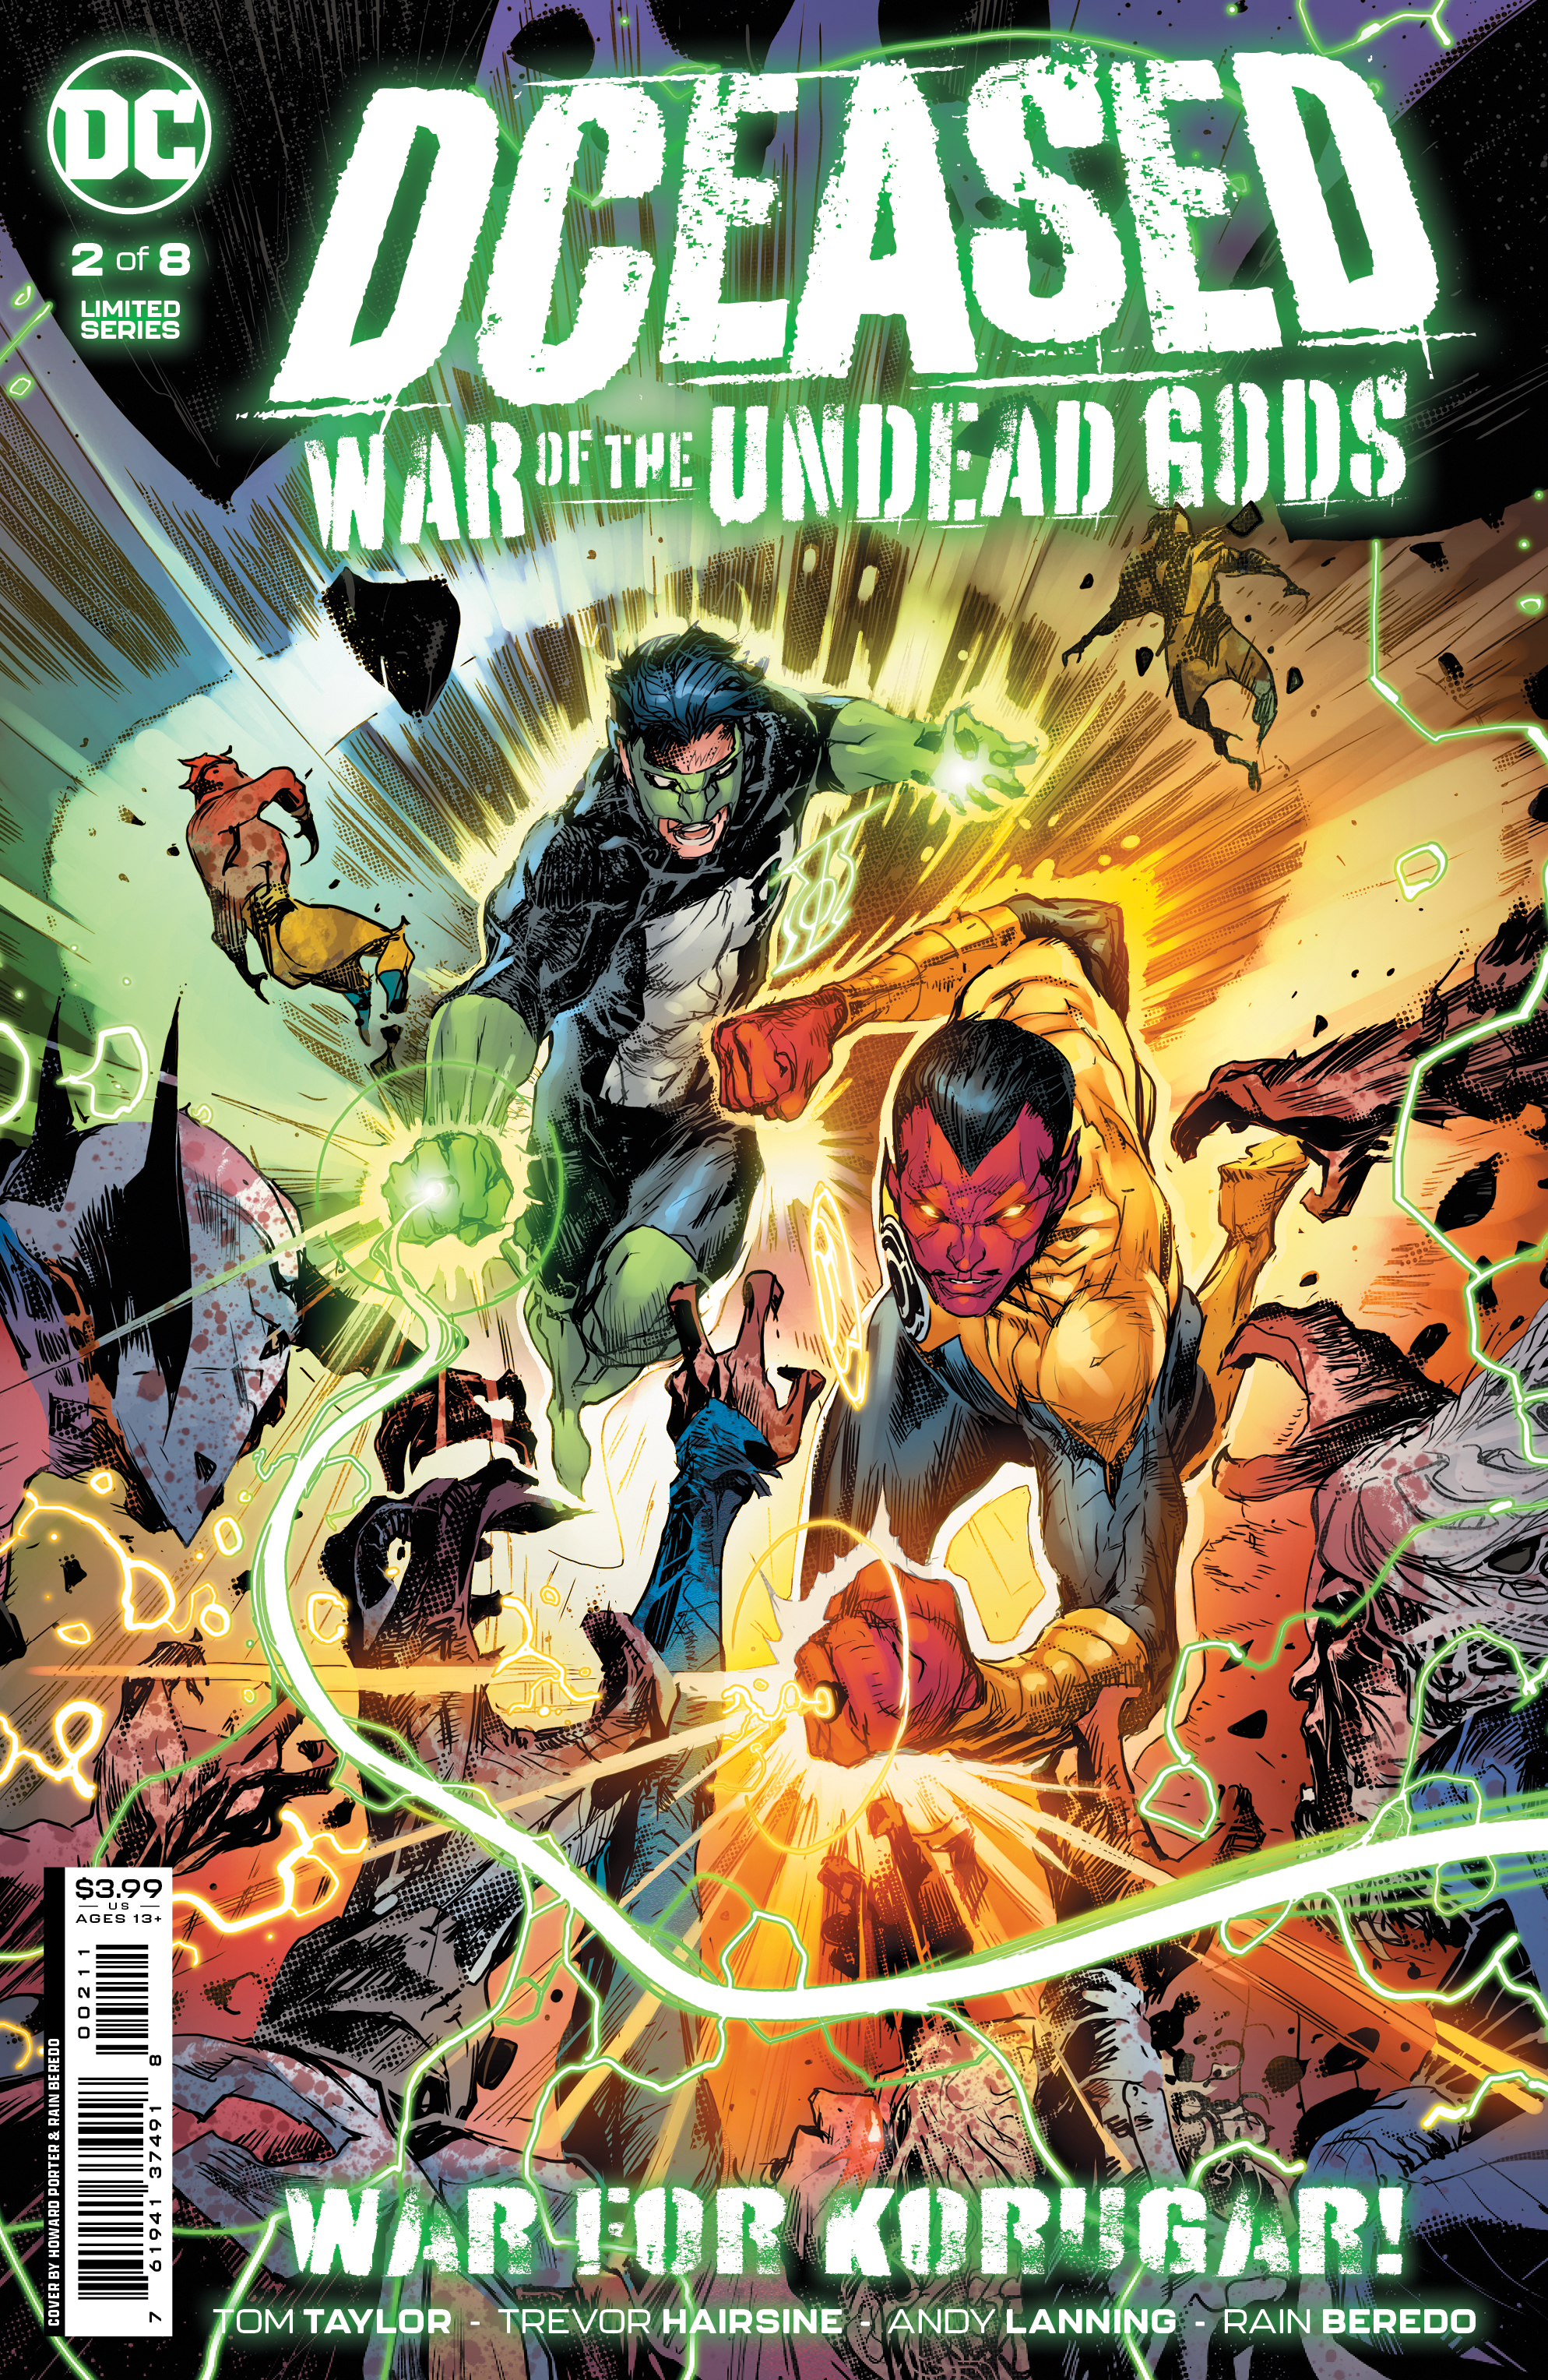 DCeased War of The Undead Gods #2 Cover A Howard Porter (Of 8)